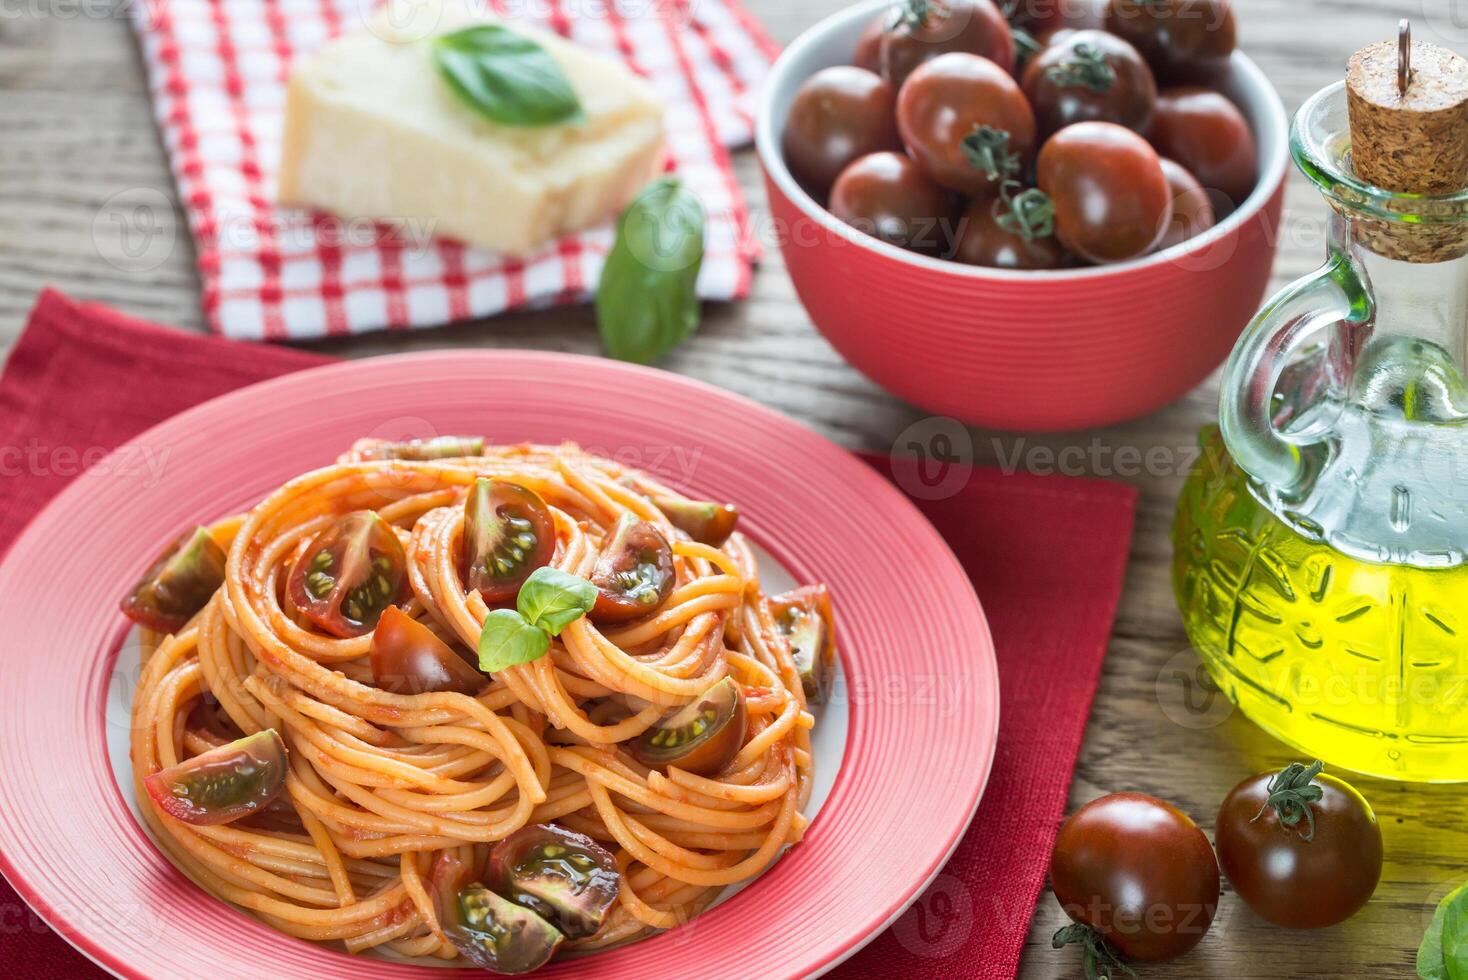 Portion of spaghetti with cherry tomatoes photo